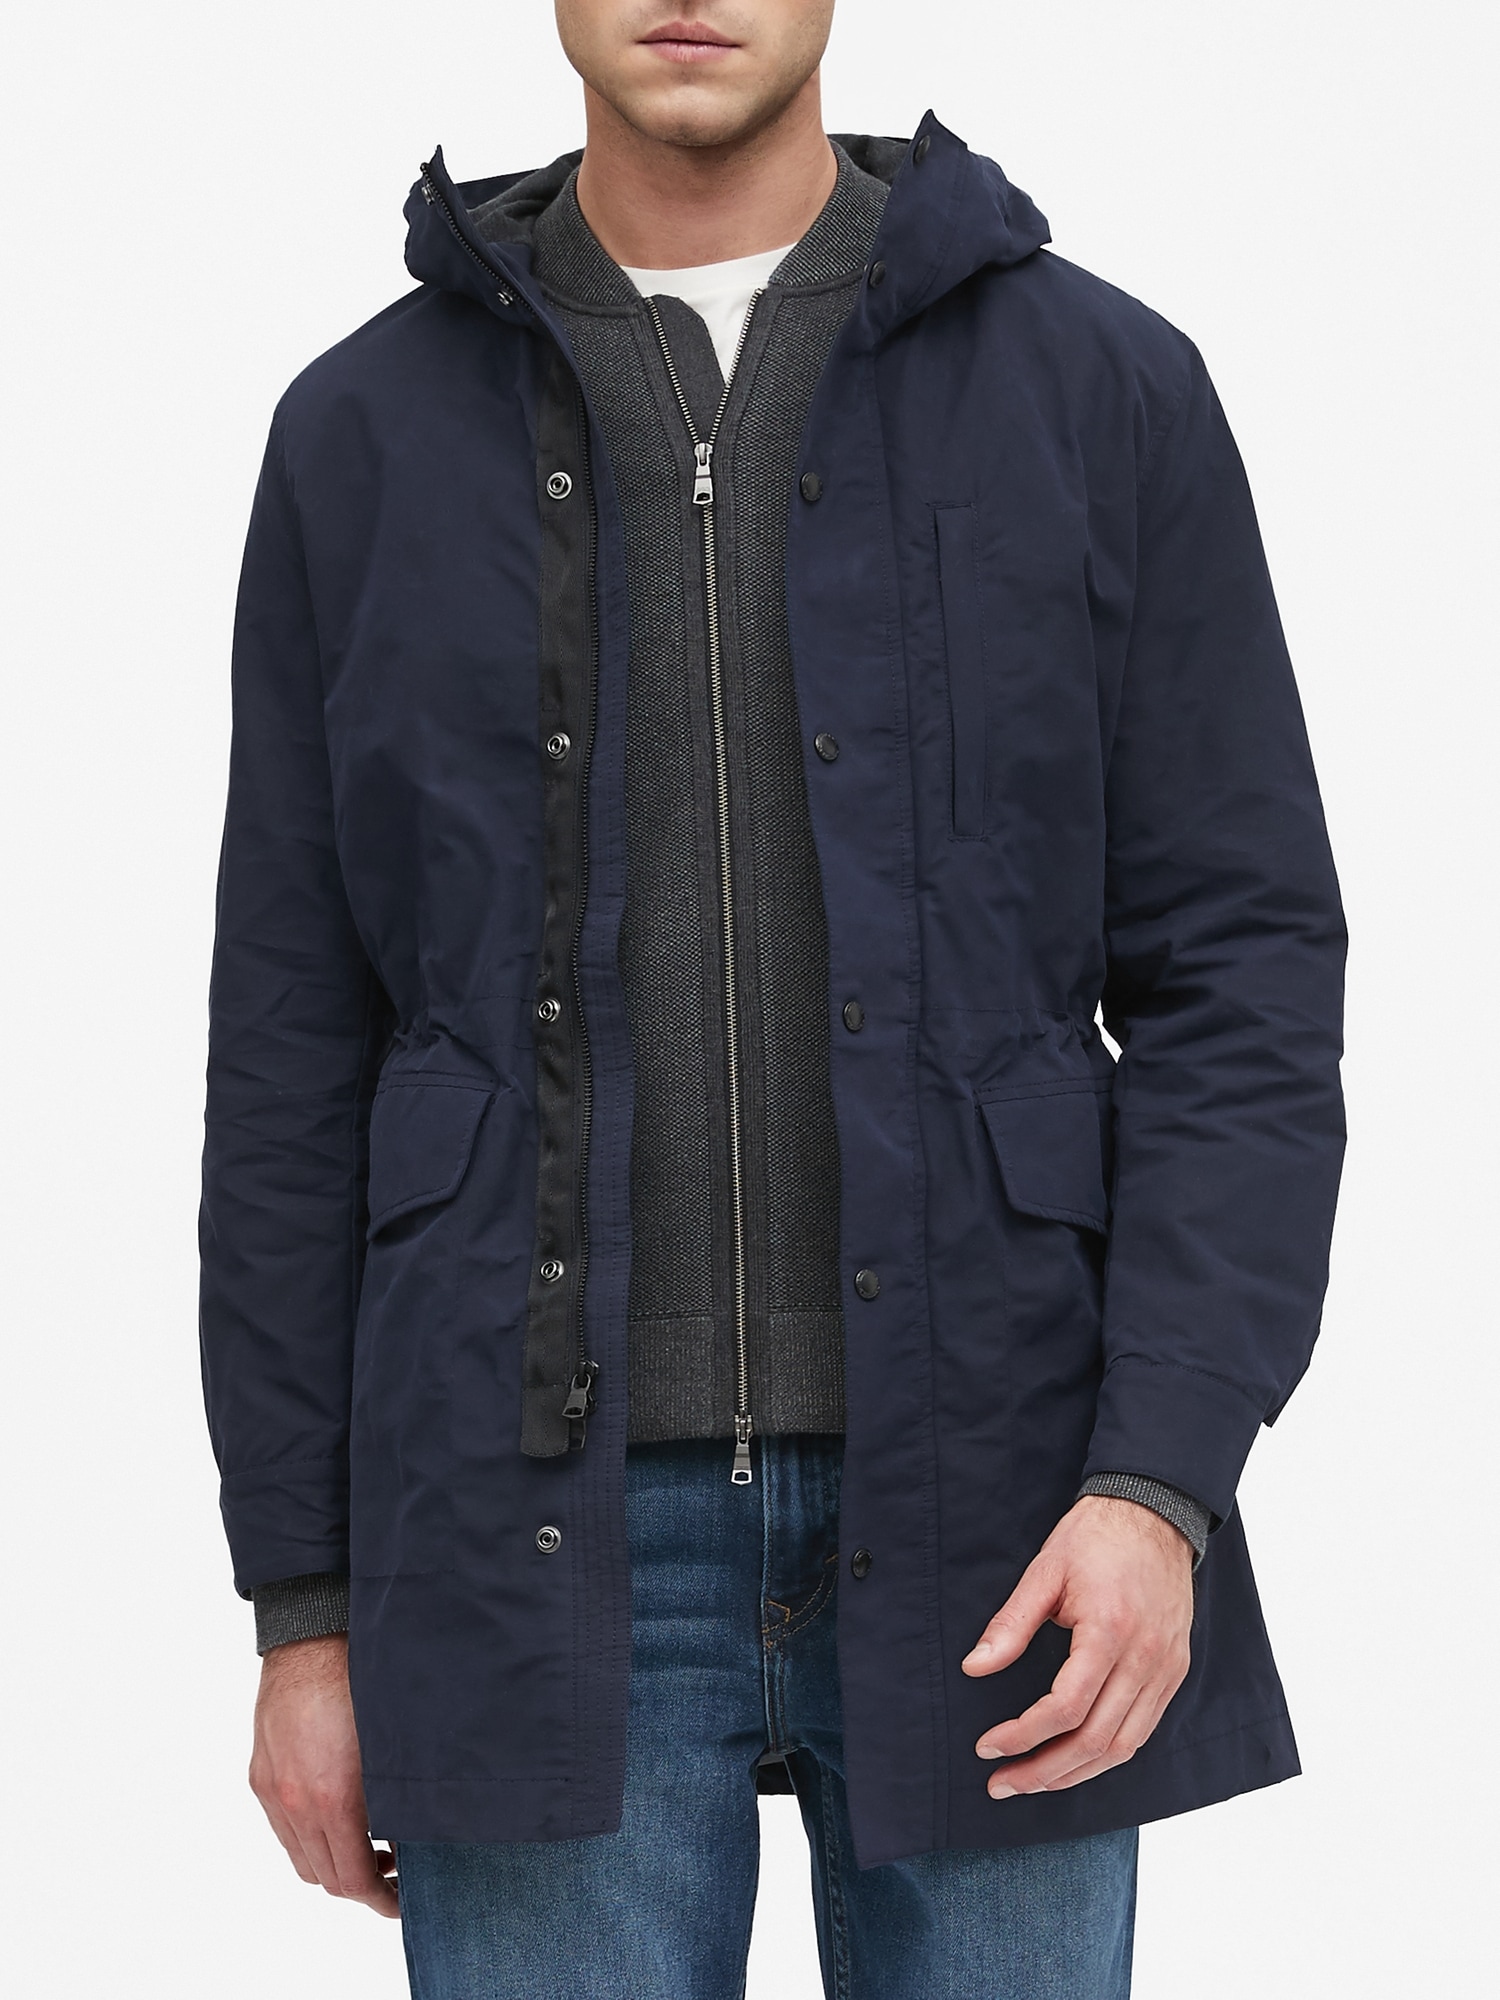 Water-Resistant Parka